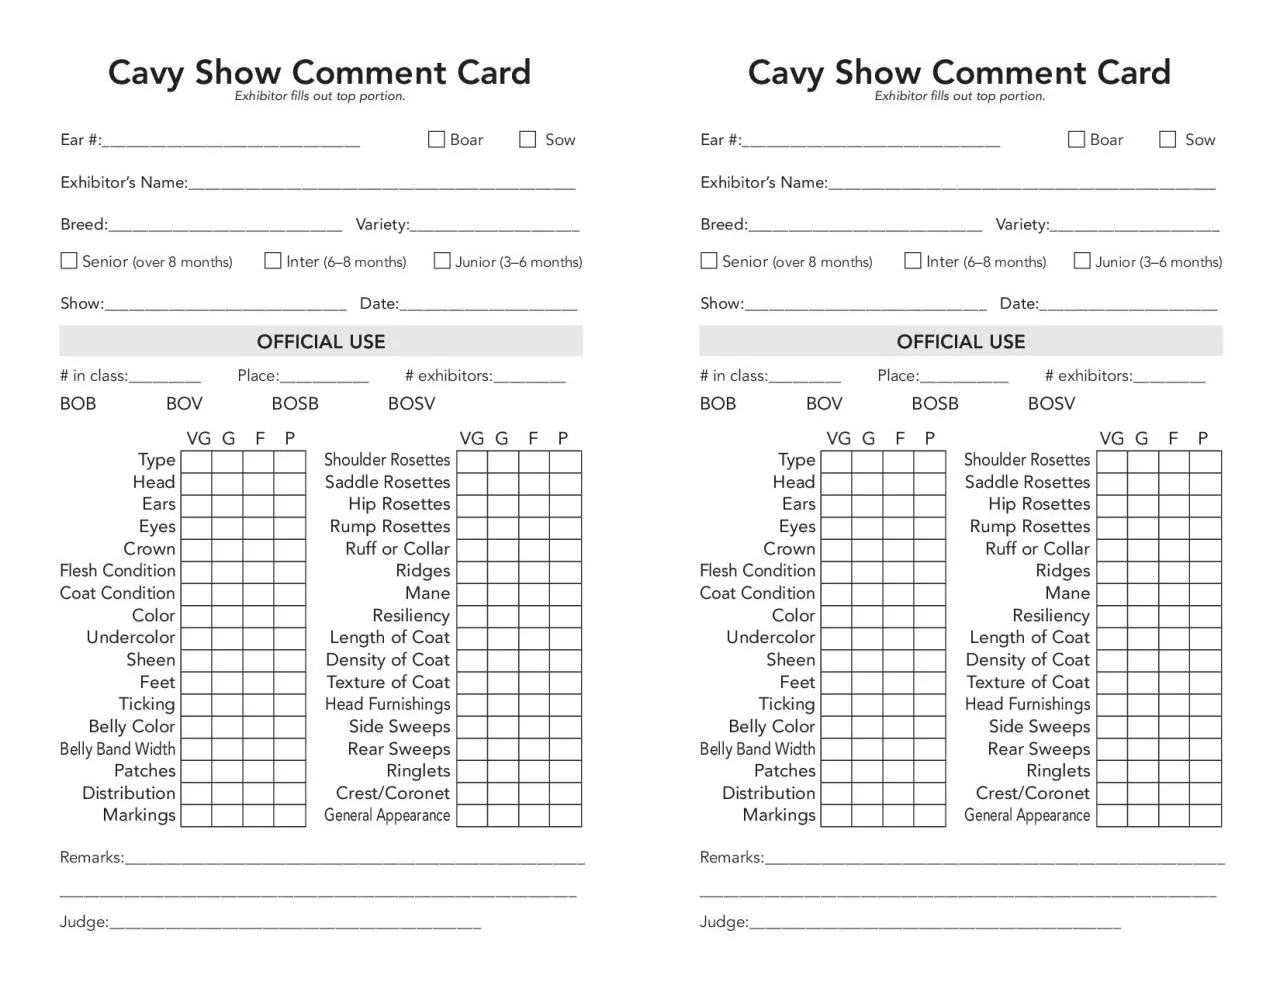 Cavy Show Comment Card